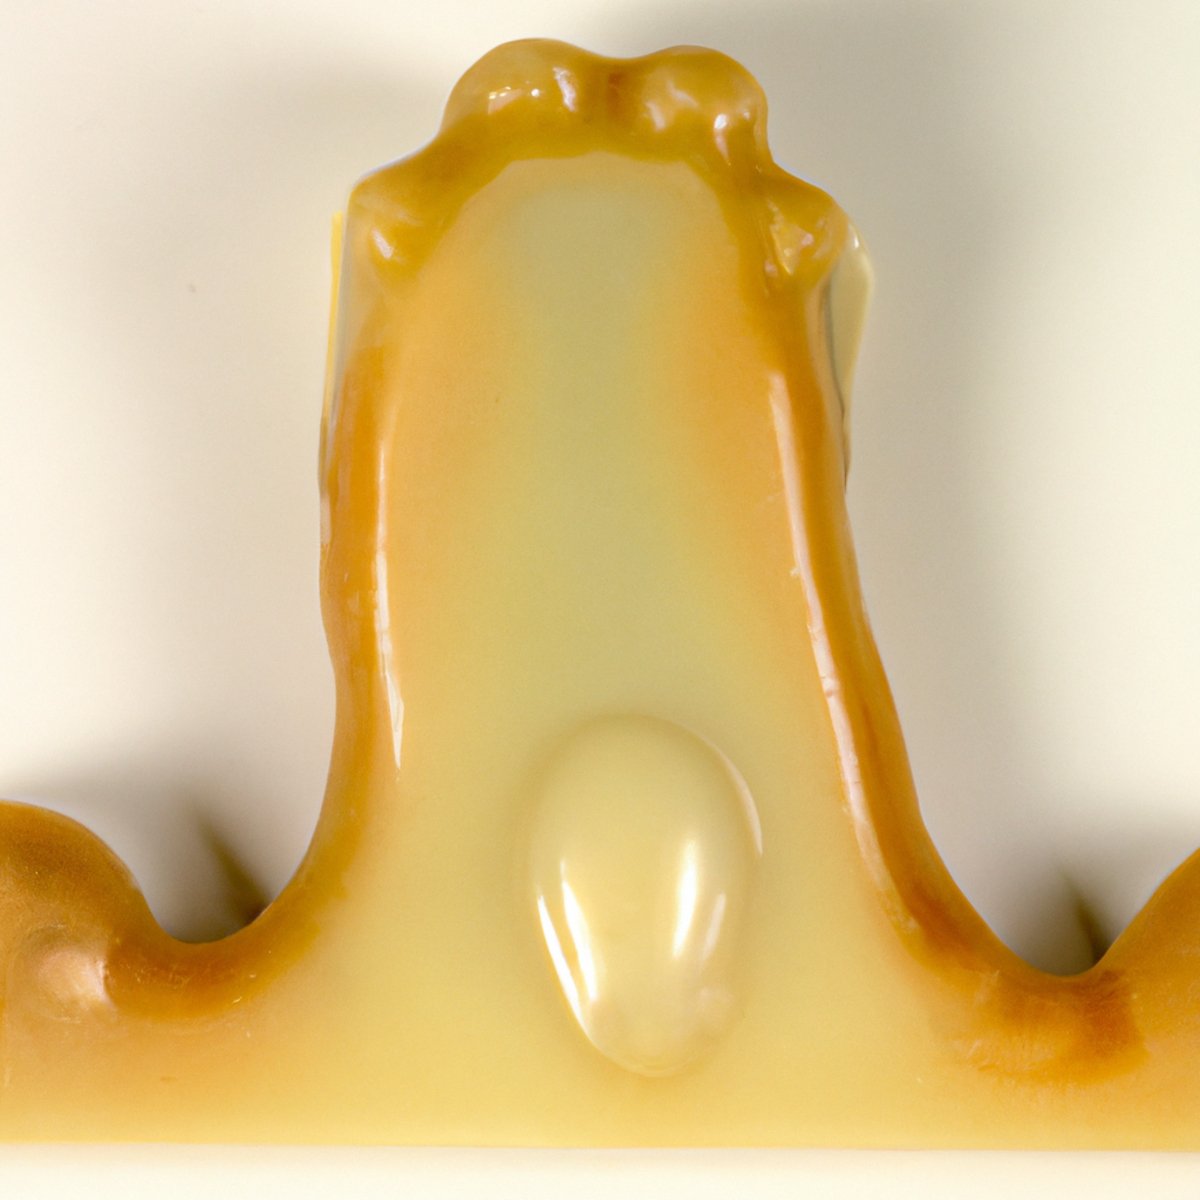 Close-up of porcelain gallbladder specimen, showcasing intricate structure, smooth surface, pale color, and hidden location.